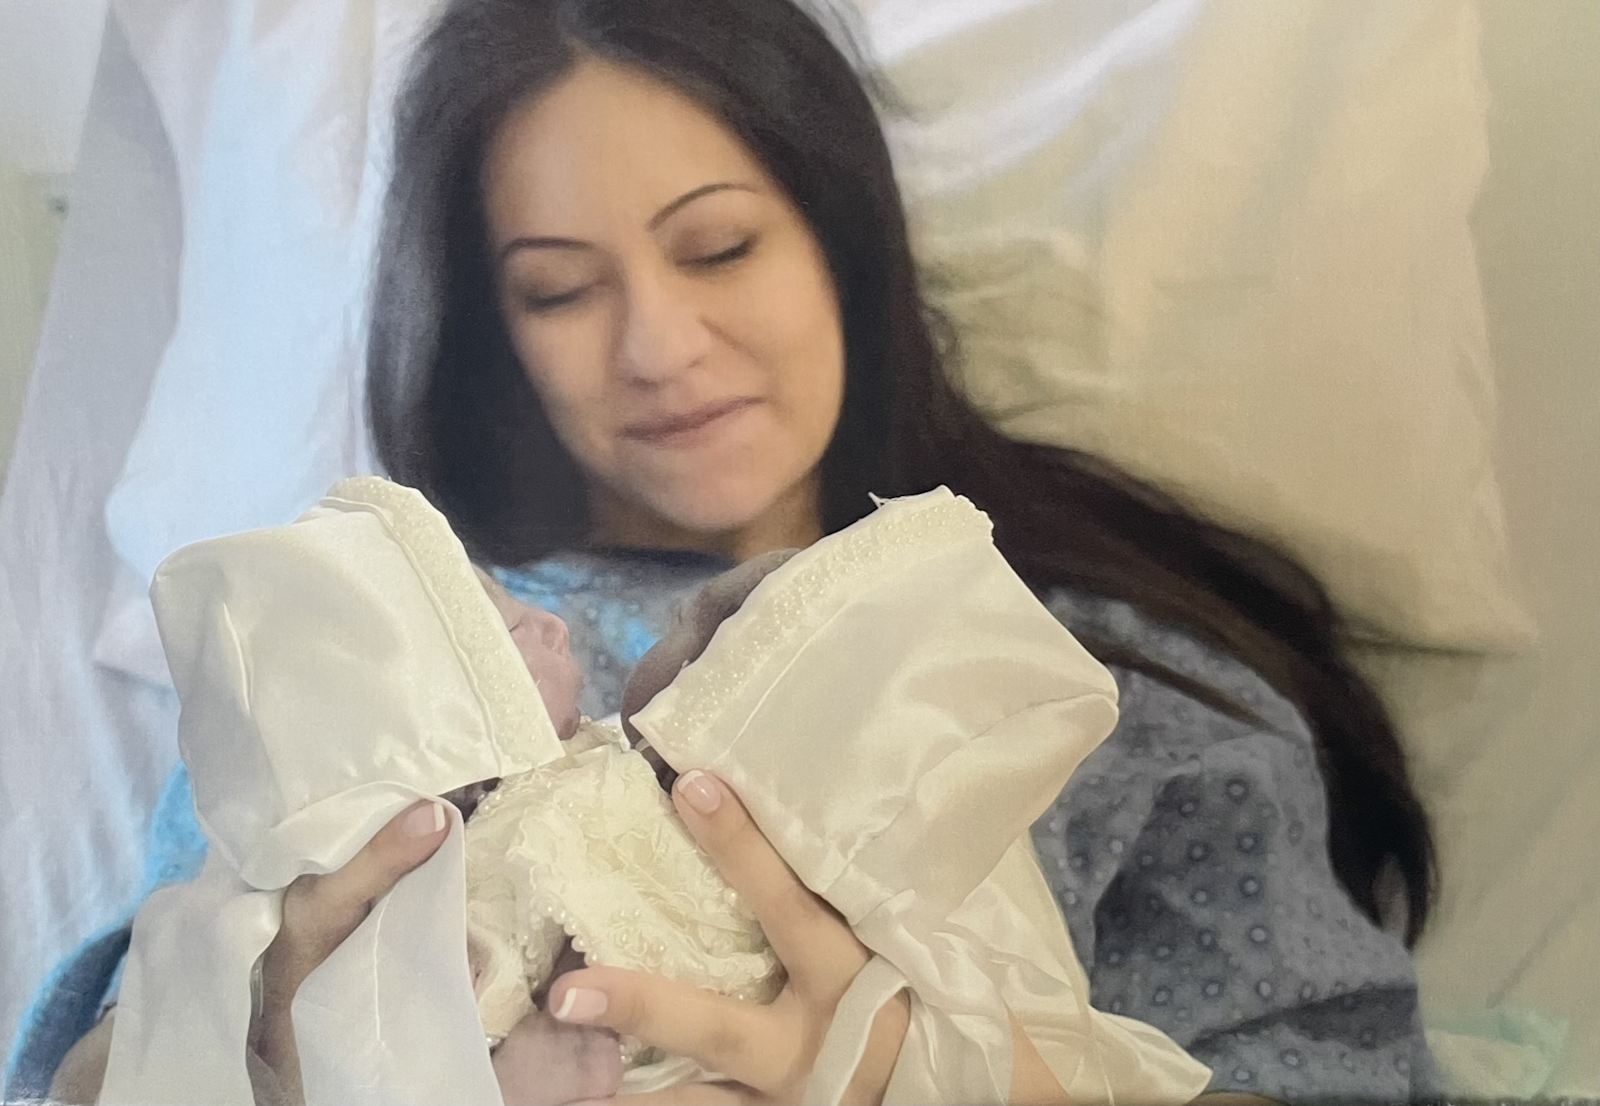 Nicole LeBlanc holds her newborn twins, Maria Teresa and Rachel Clare, moments after their birth May 16. The conjoined sisters lived for just more than an hour, receiving the sacraments of baptism and confirmation from Fr. David Pellican, who has accompanied the family along their difficult pregnancy. (Courtesy of Nicole LeBlanc)